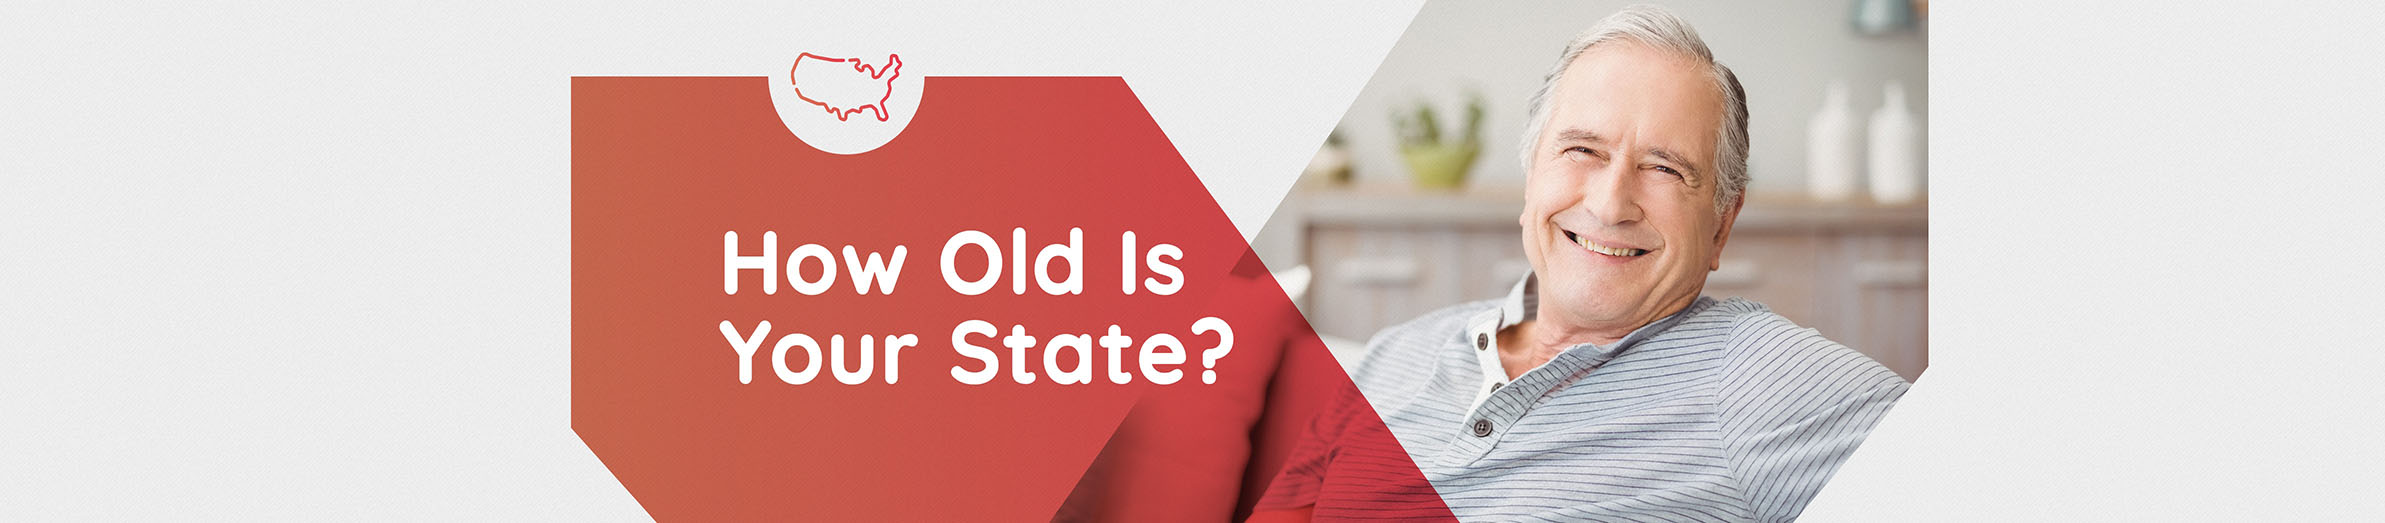 How Old Is Your State?